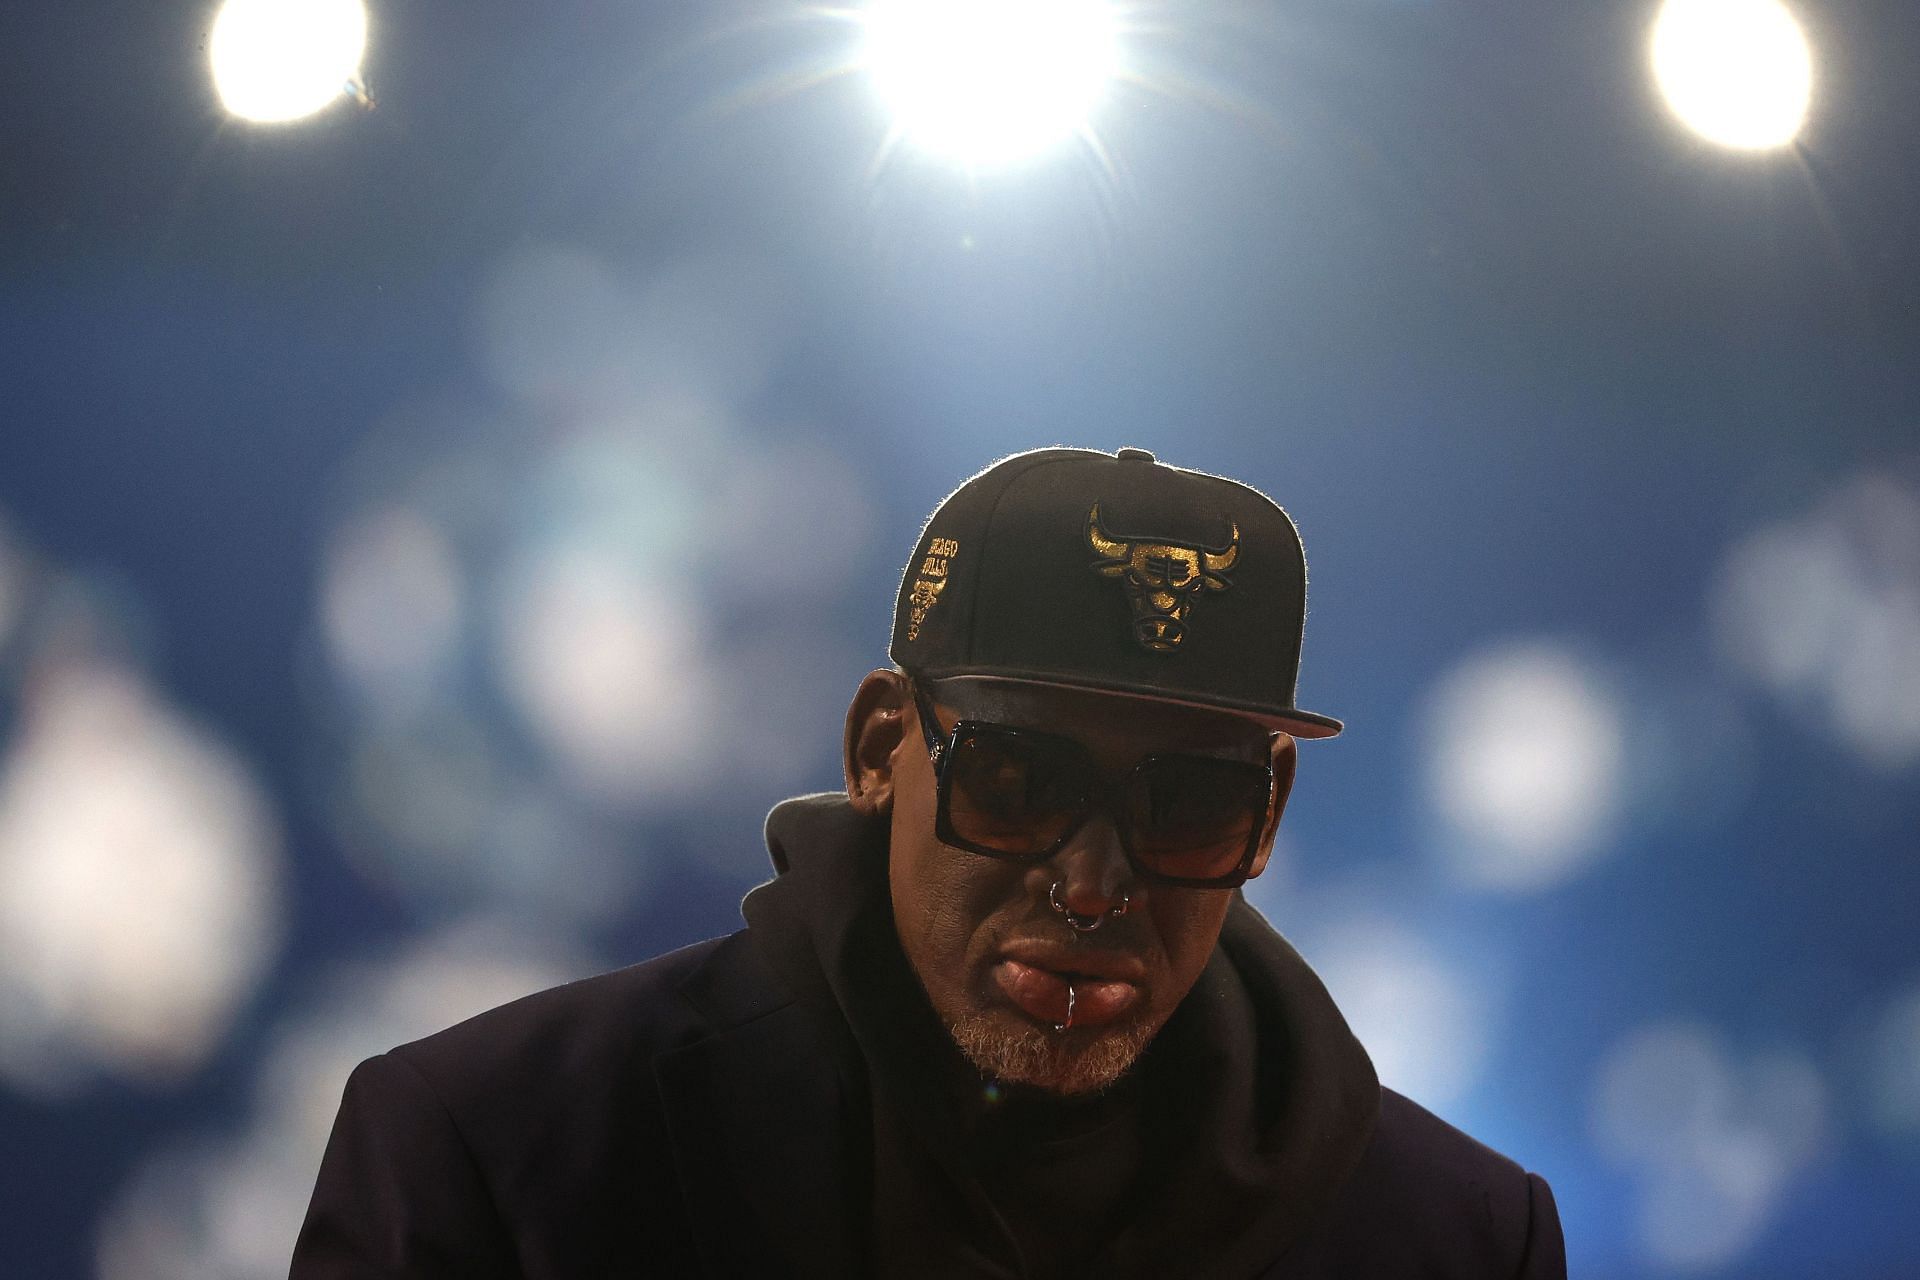 Dennis Rodman reacts after being introduced as part of the NBA 75th Anniversary Team during the All-Star Game on Feb. 20 in Cleveland, Ohio.